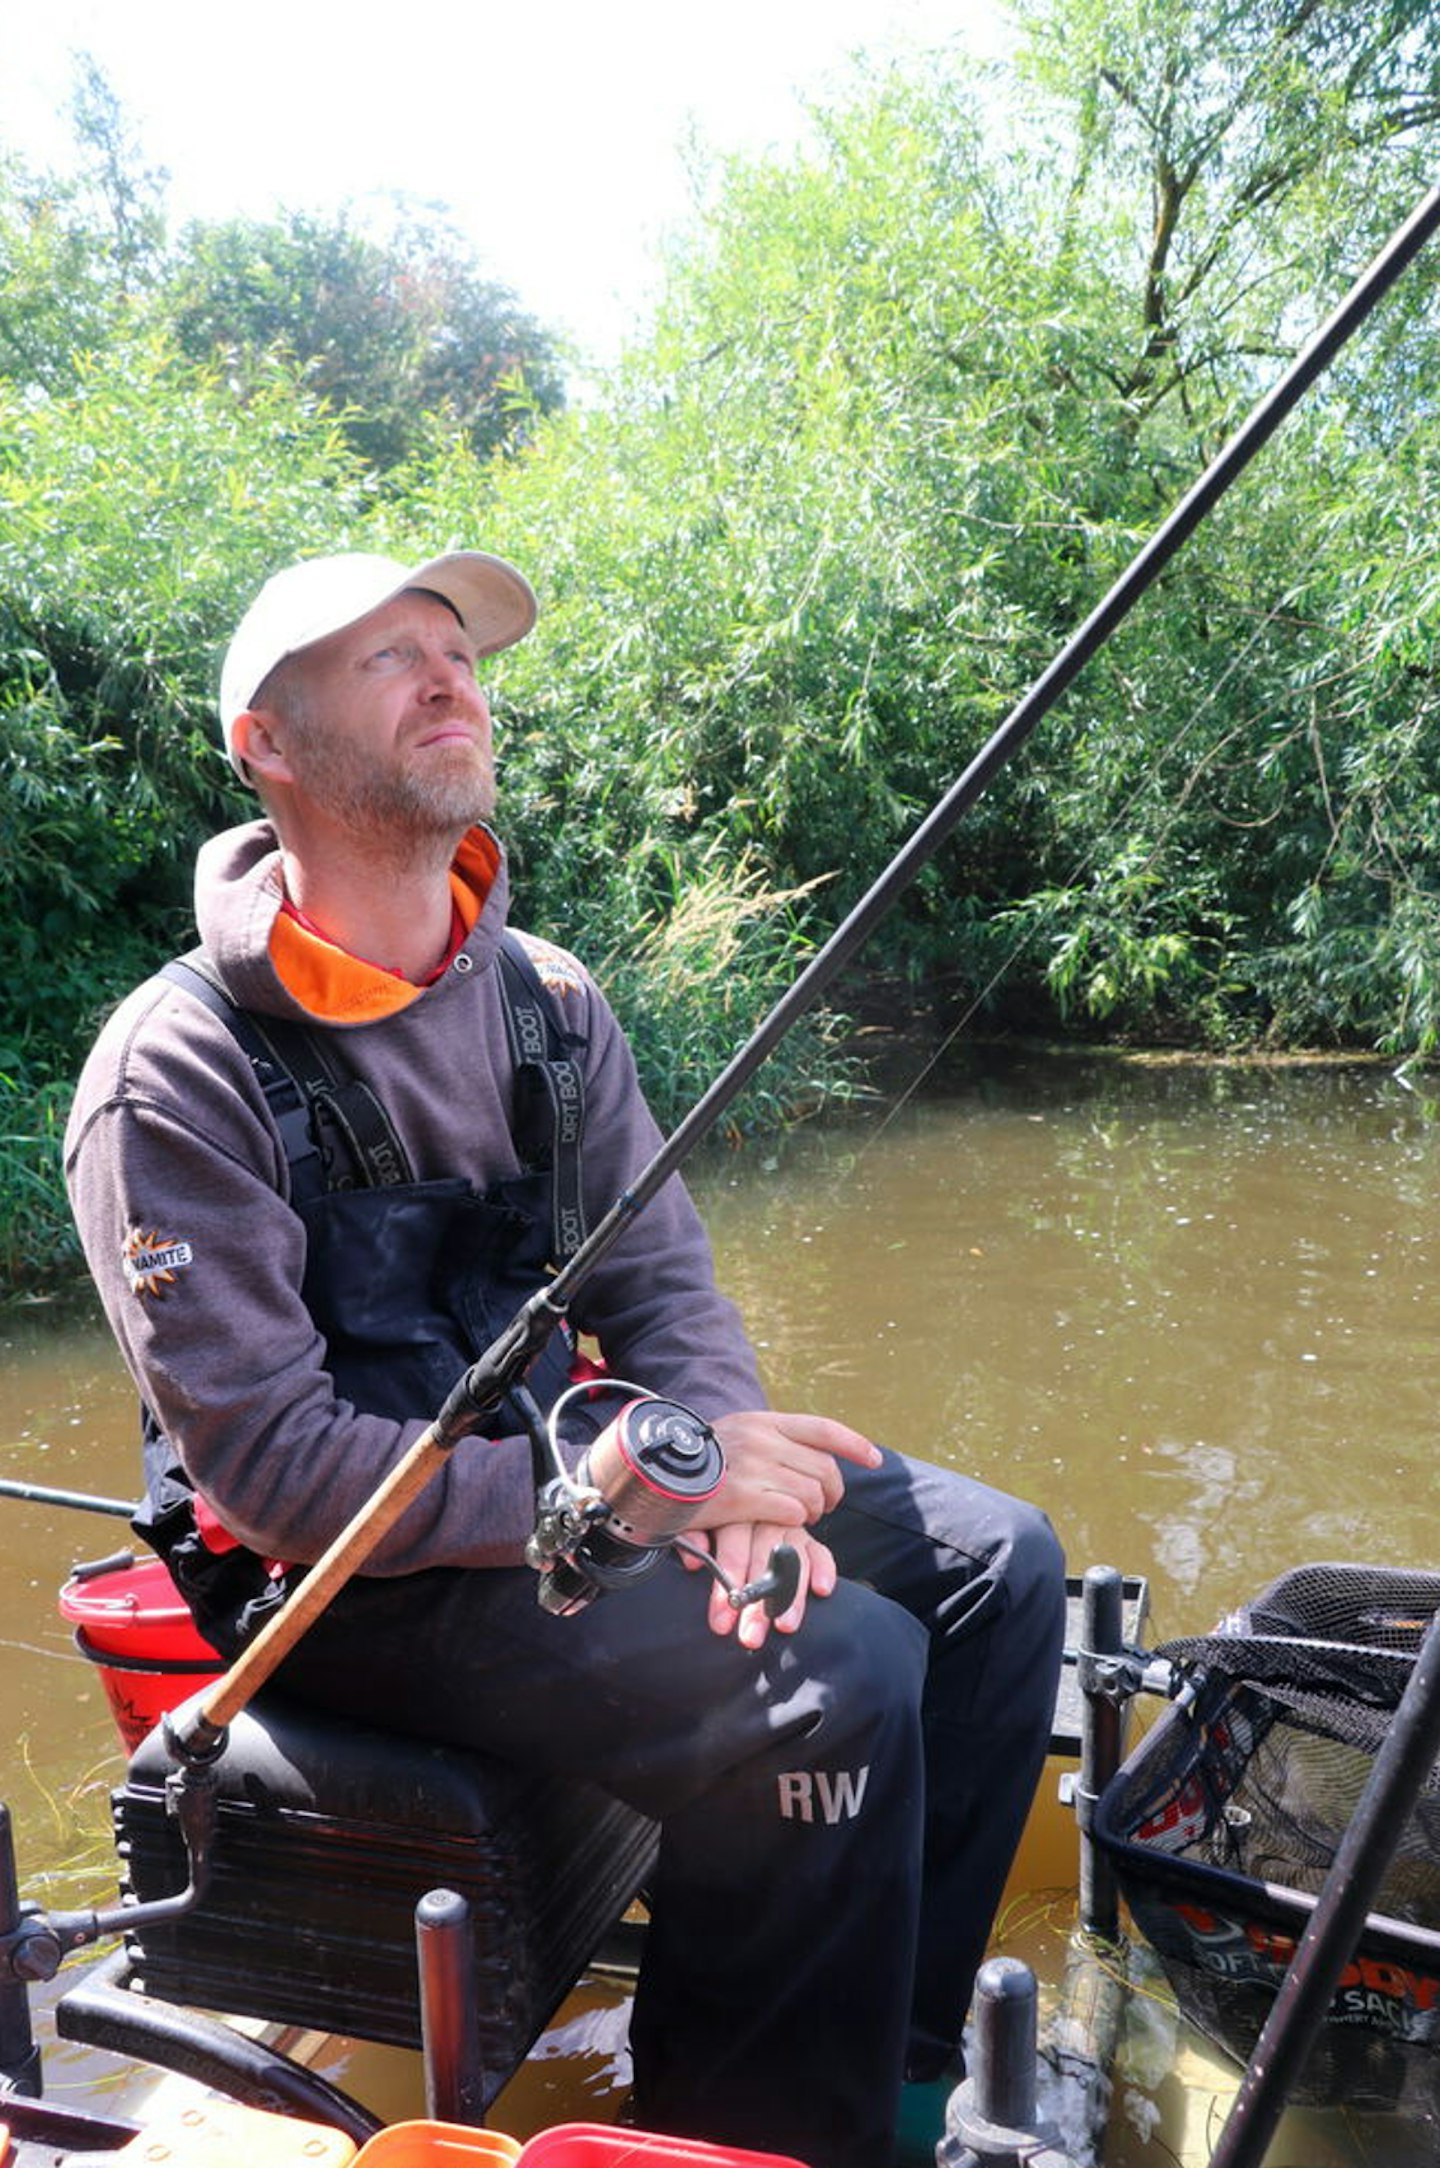 How to fish pellets for a mixed net on the river – Rob Wootton